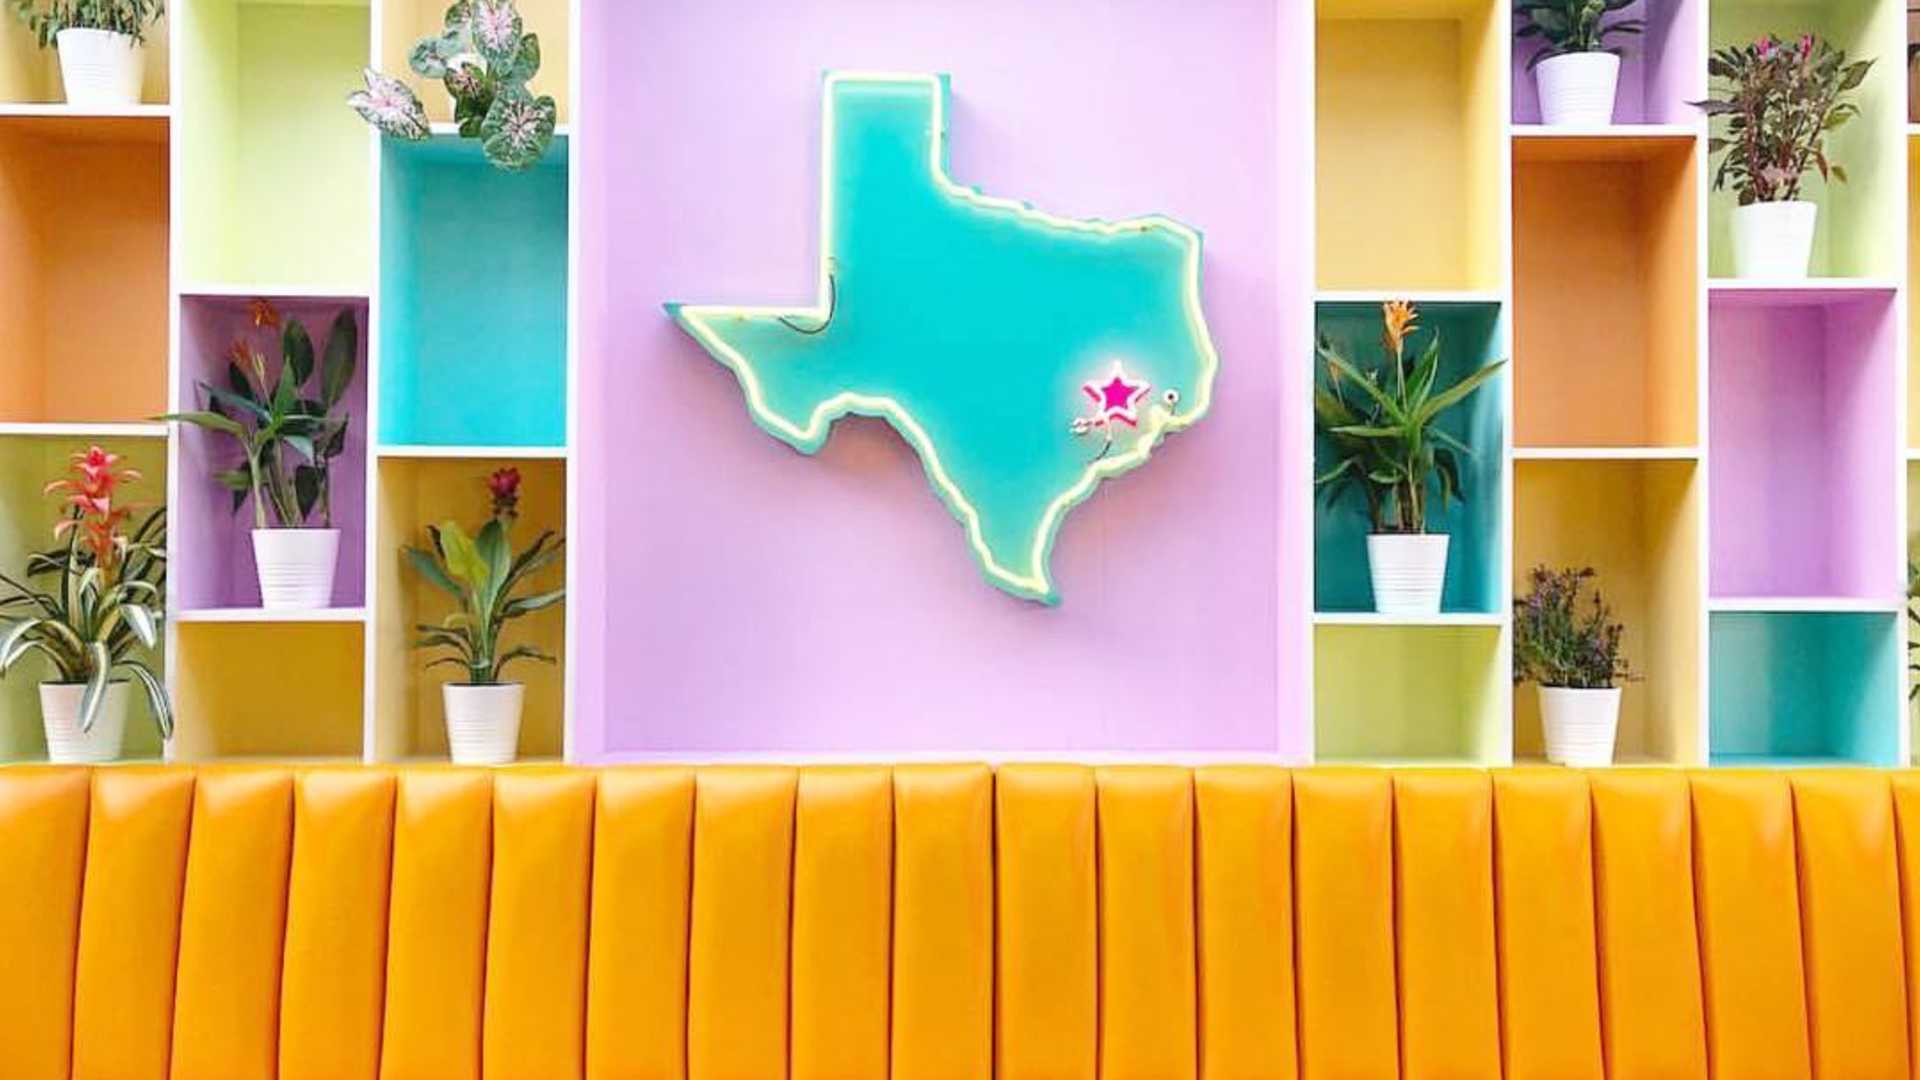 Texas Art Behind Couch